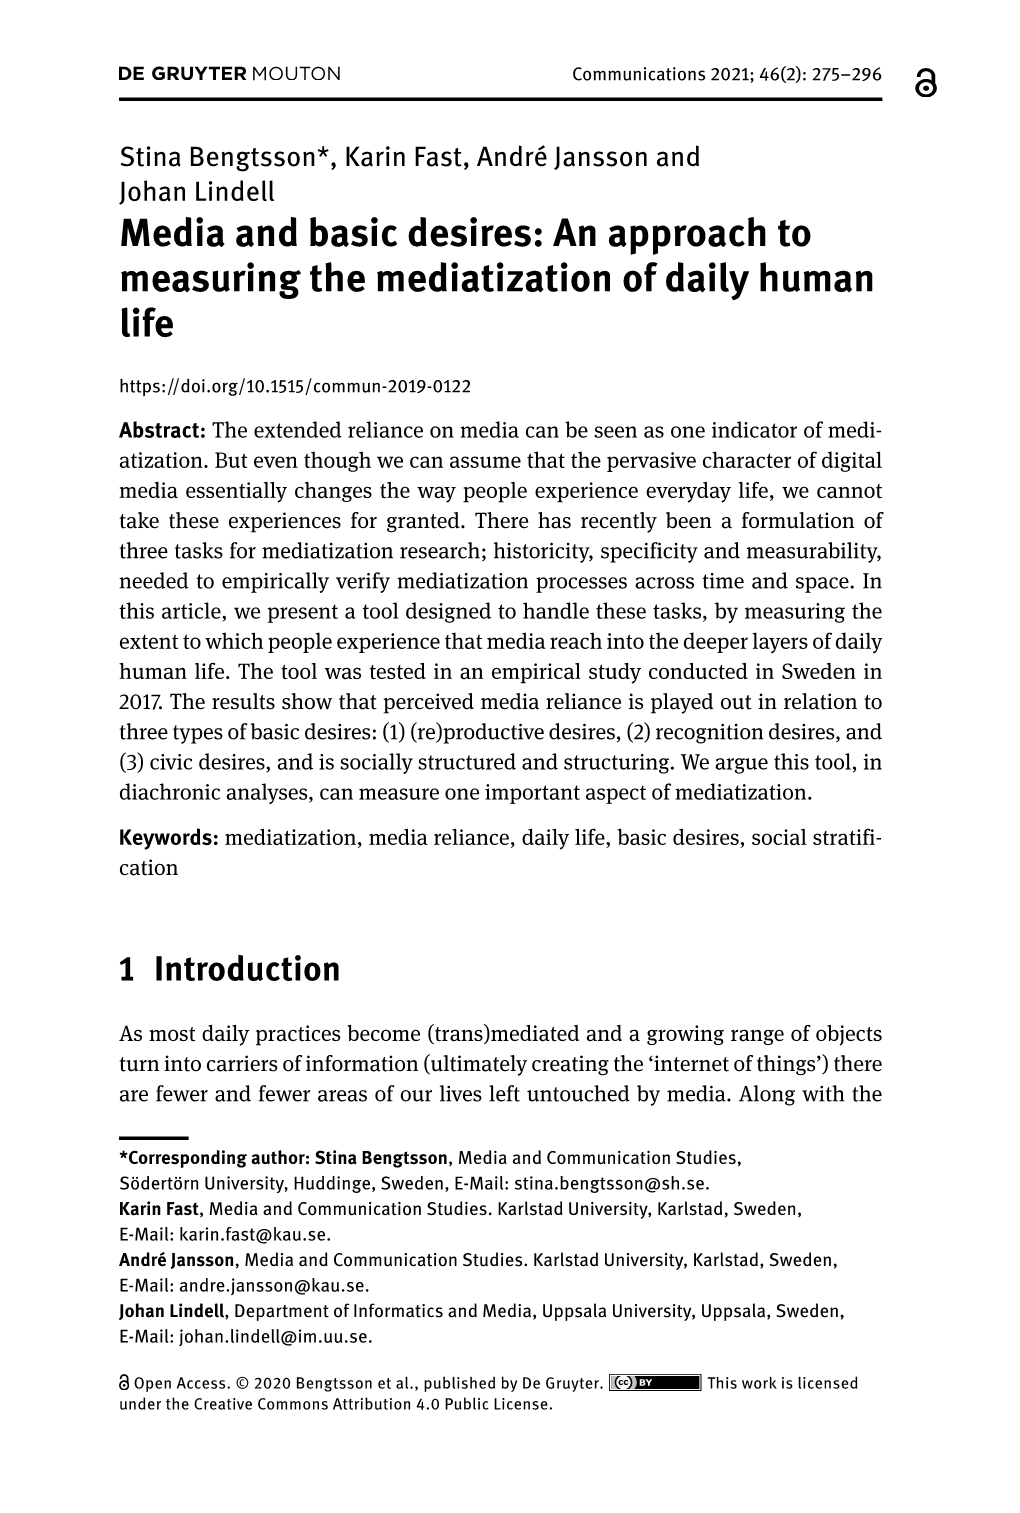 Media and Basic Desires: an Approach to Measuring the Mediatization of Daily Human Life